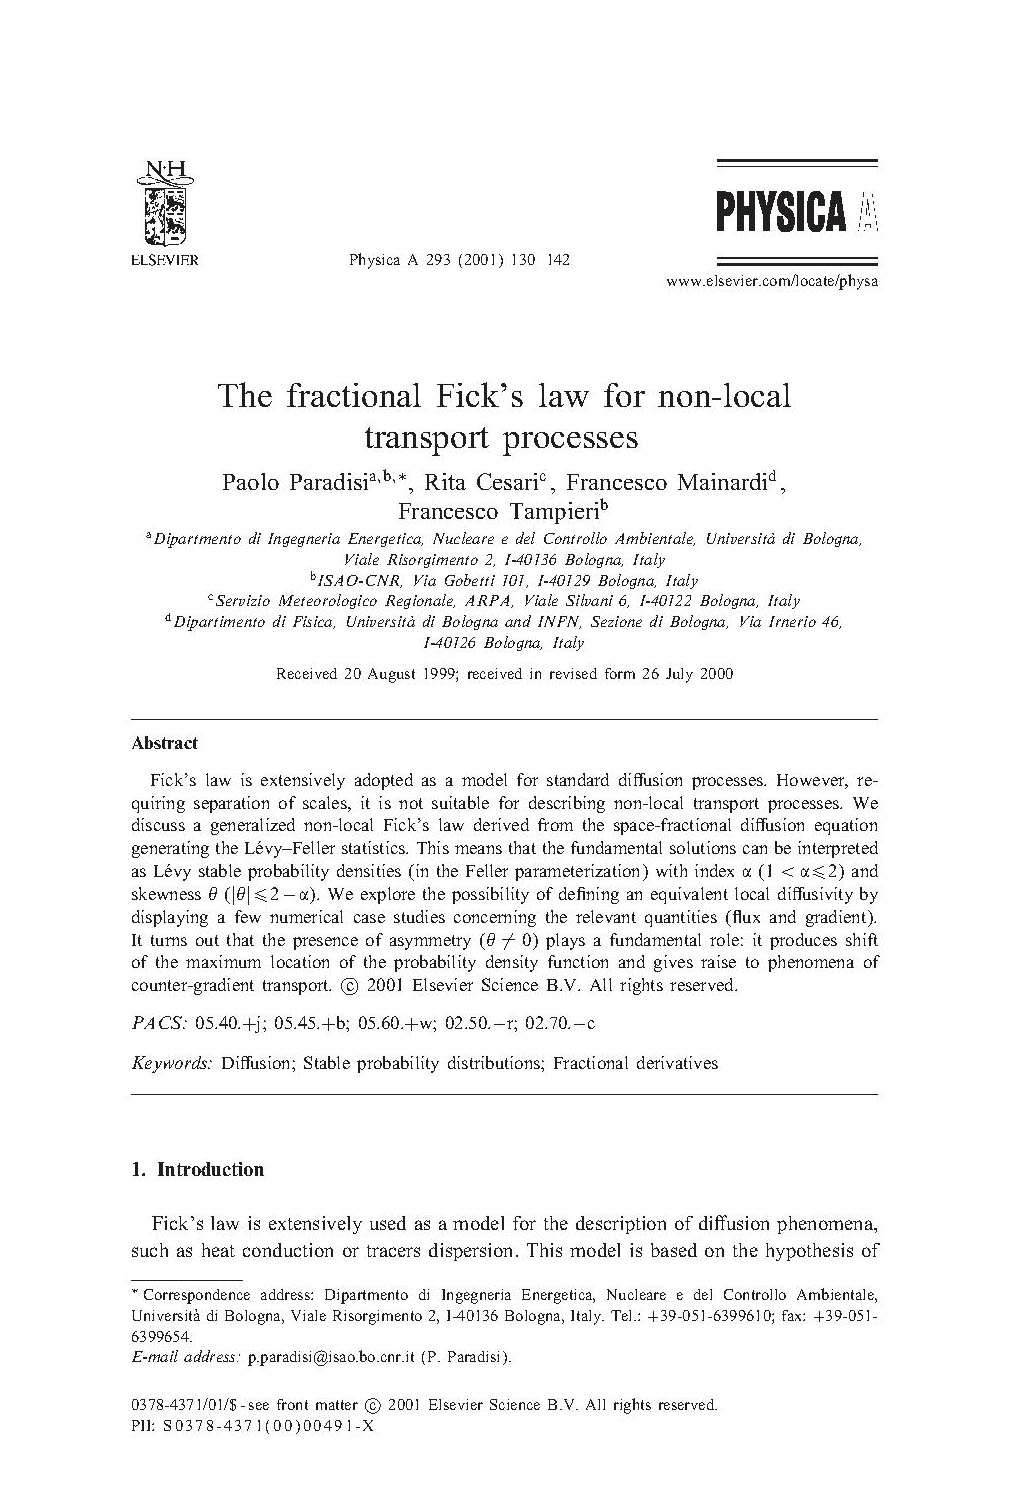 The fractional Fick’s law for non-local transport processes